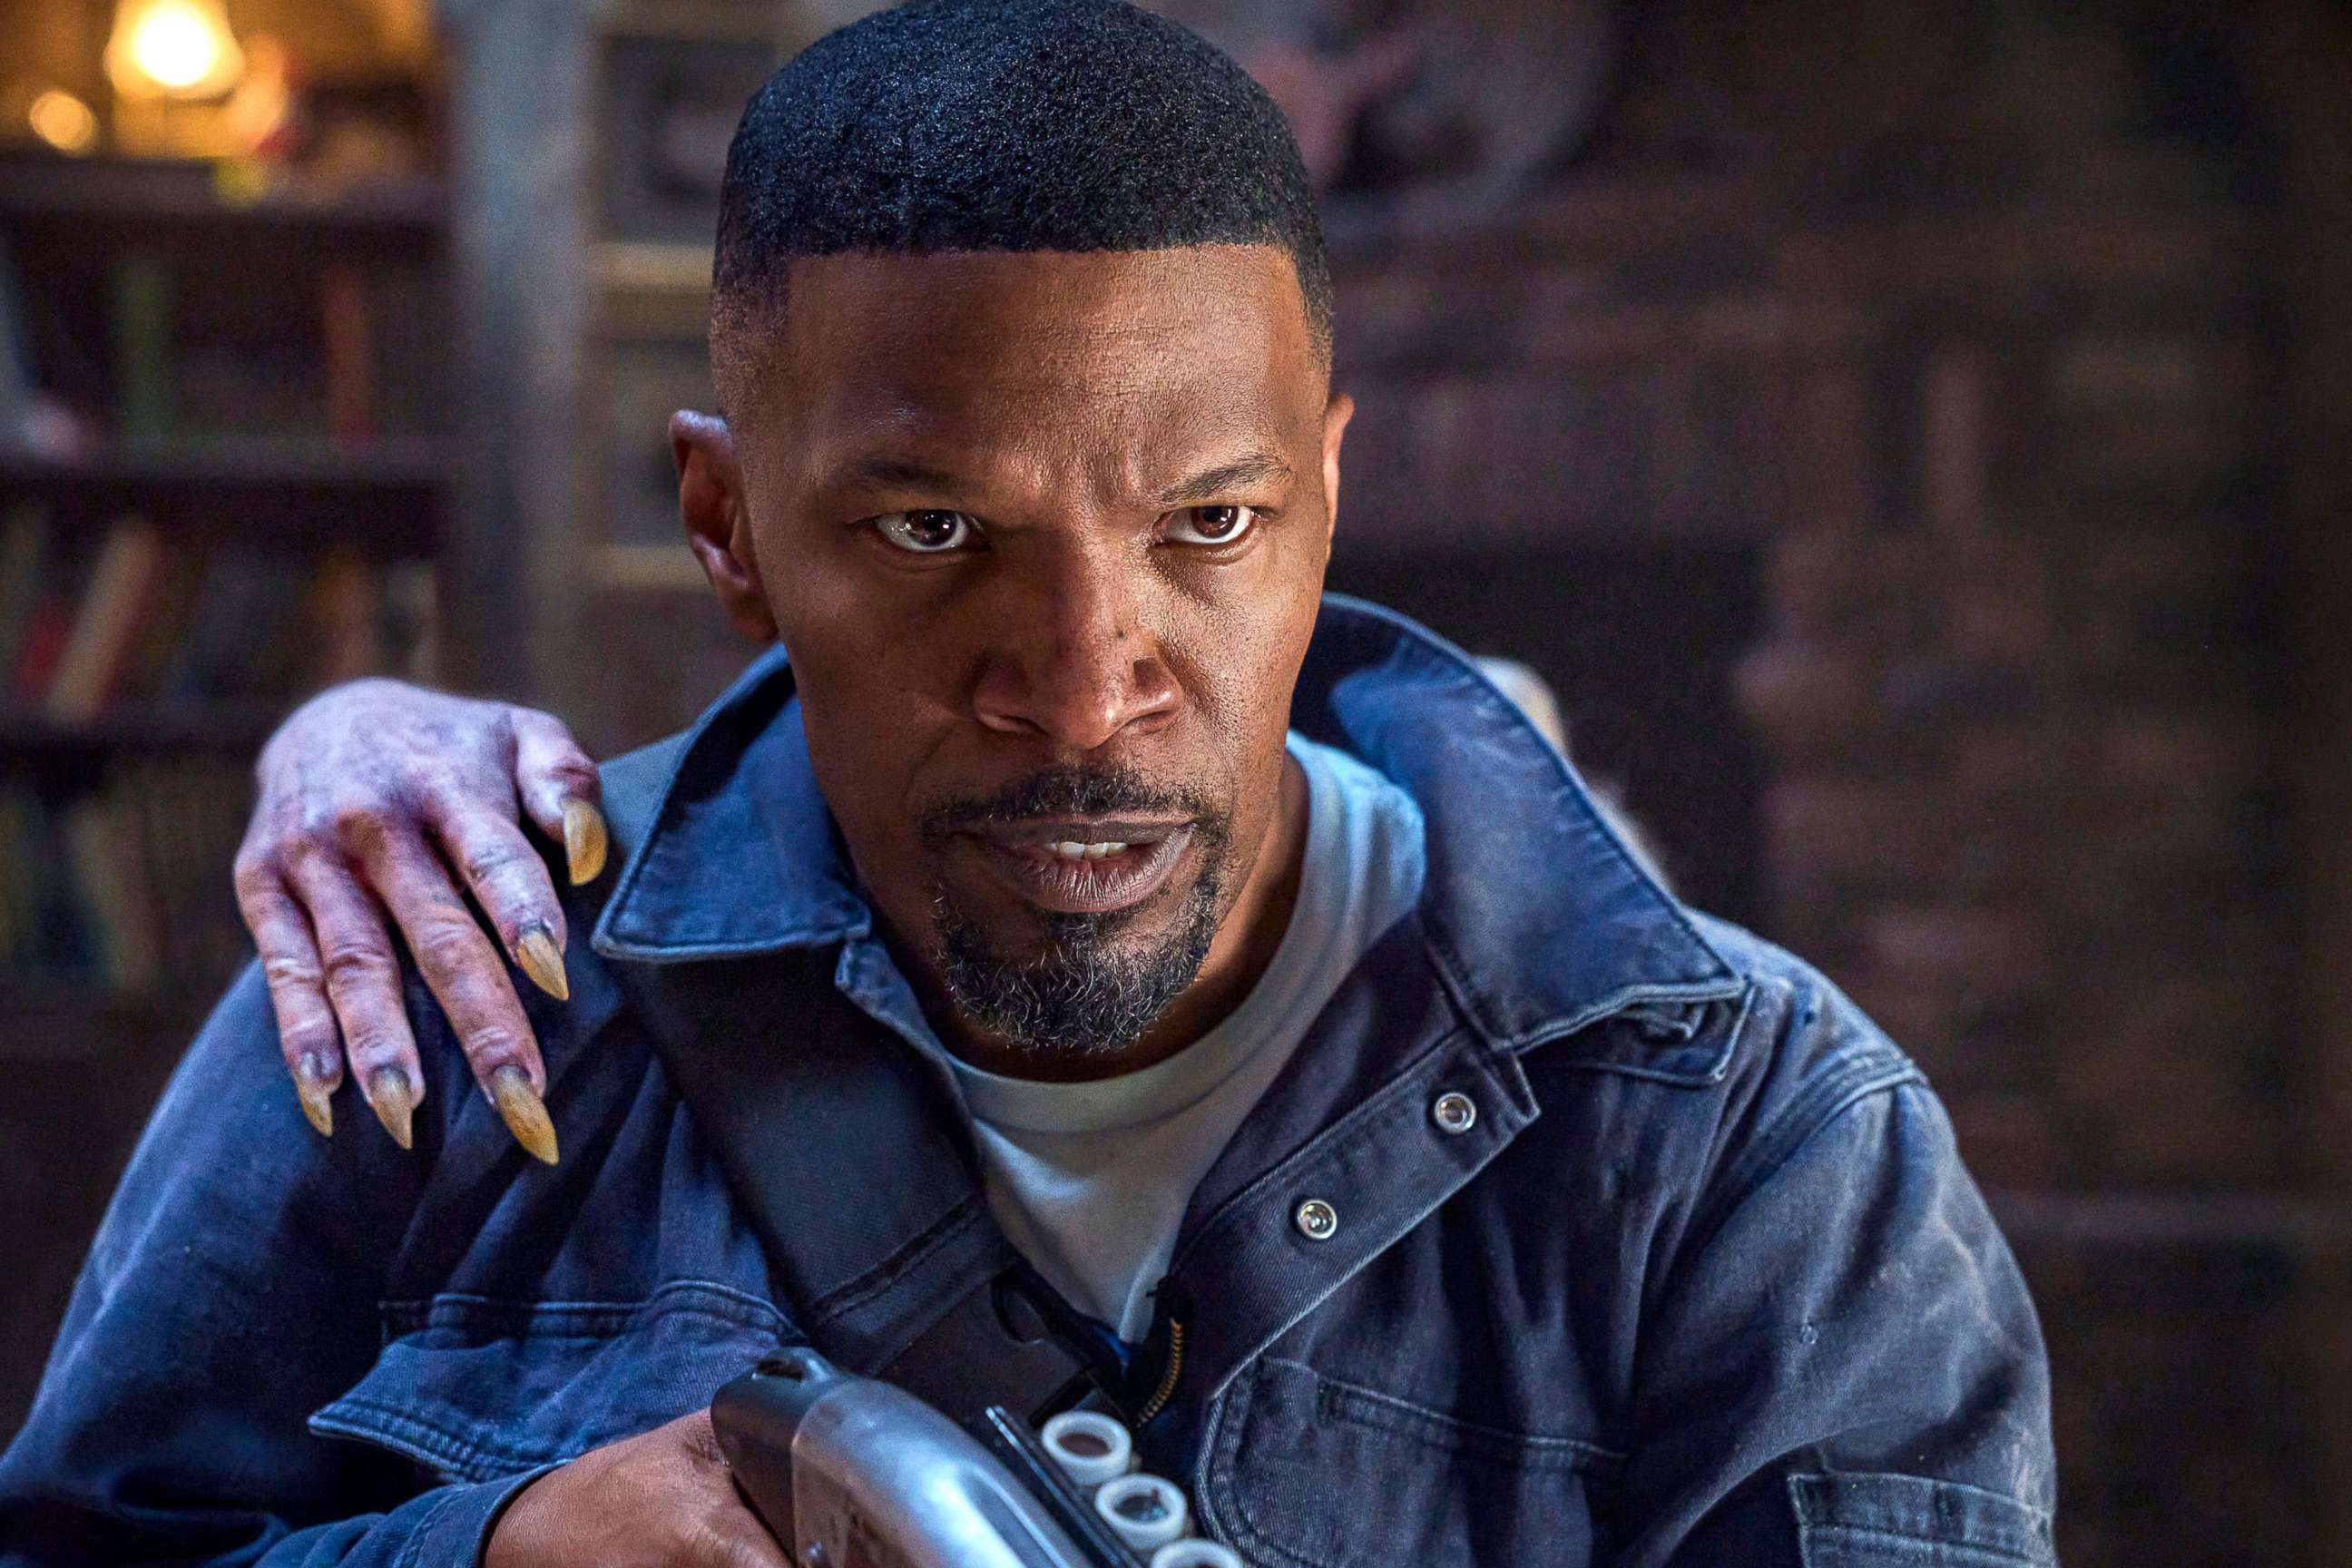 PHOTO: Jamie Foxx, as Bud, in a scene from "Day Shift."